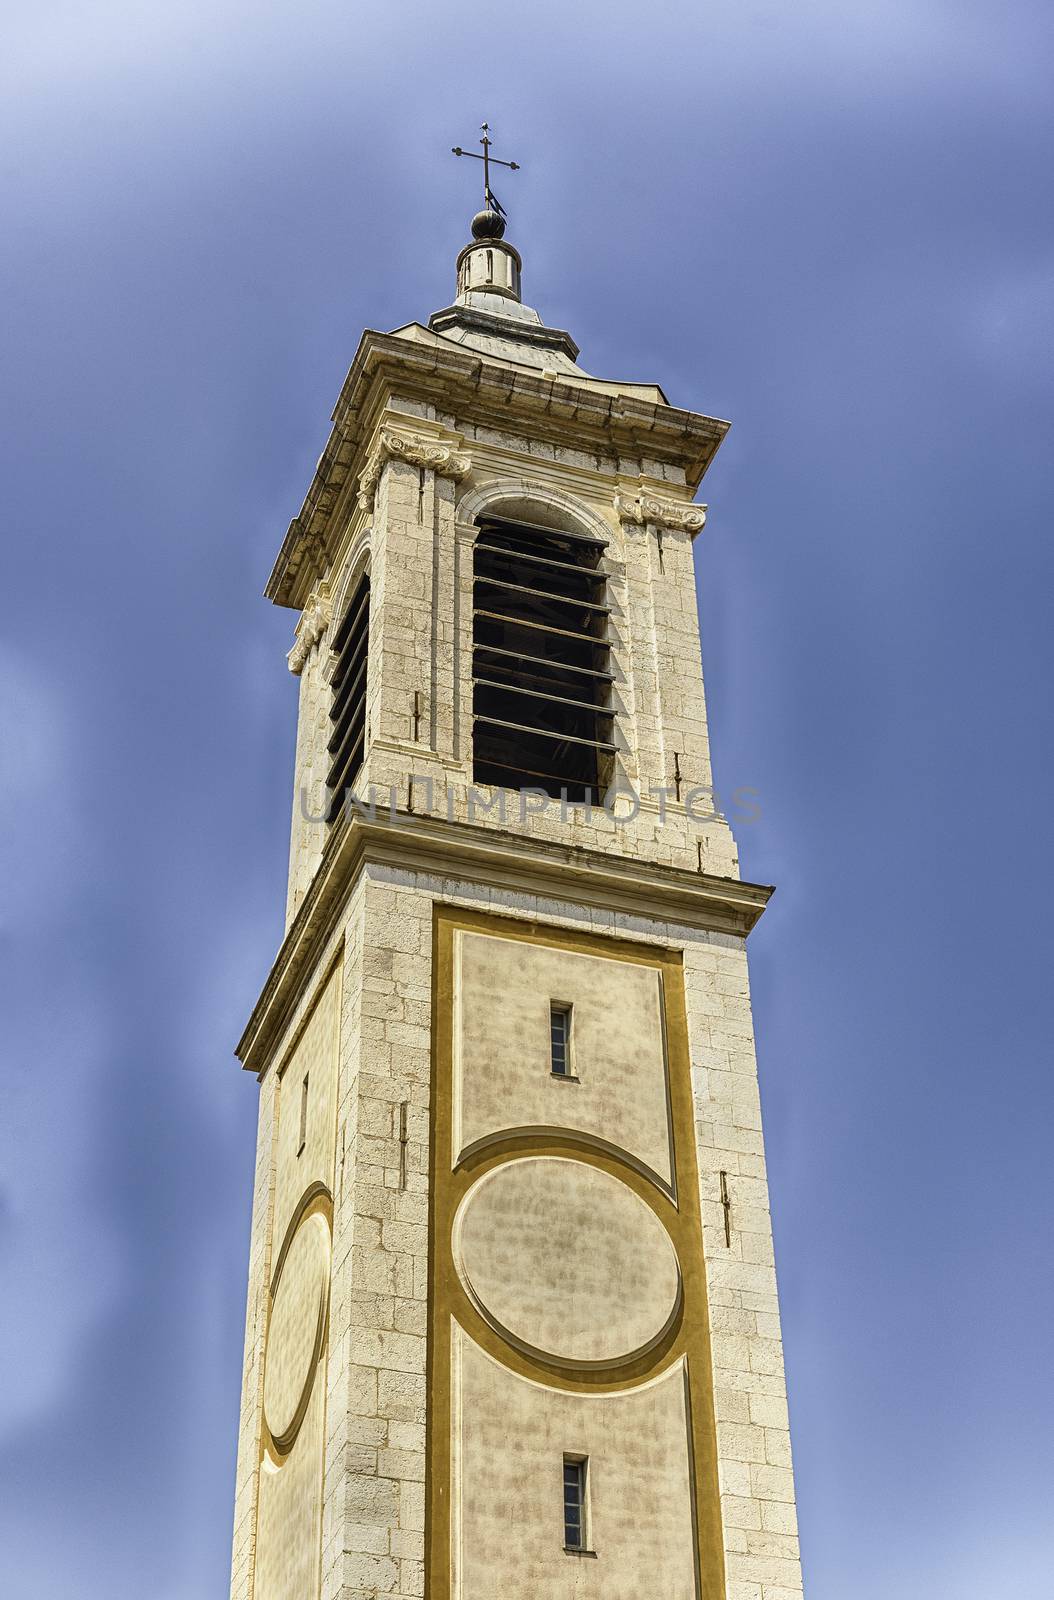 Belltower of the baroque Nice Cathedral, Cote d'Azur, France by marcorubino